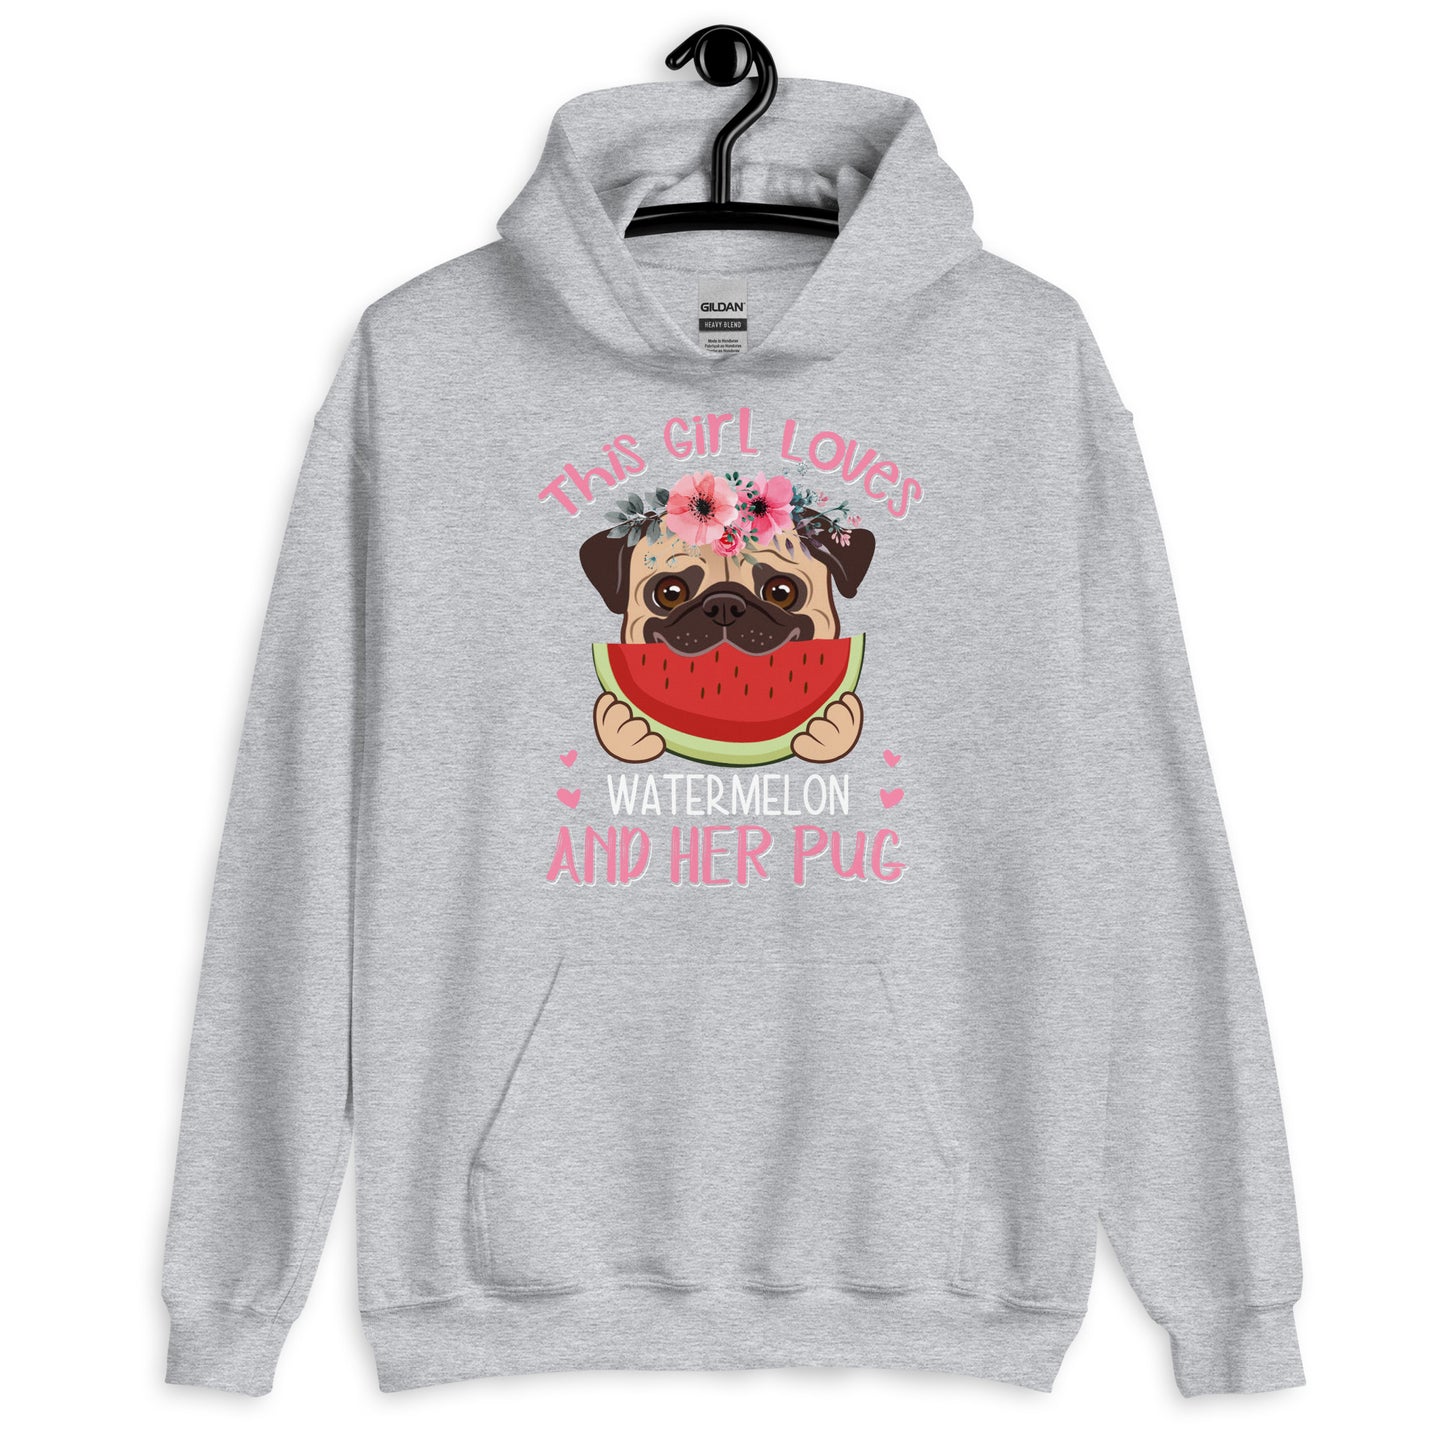 This Girl Loves Watermelon and Her Pug Hoodie